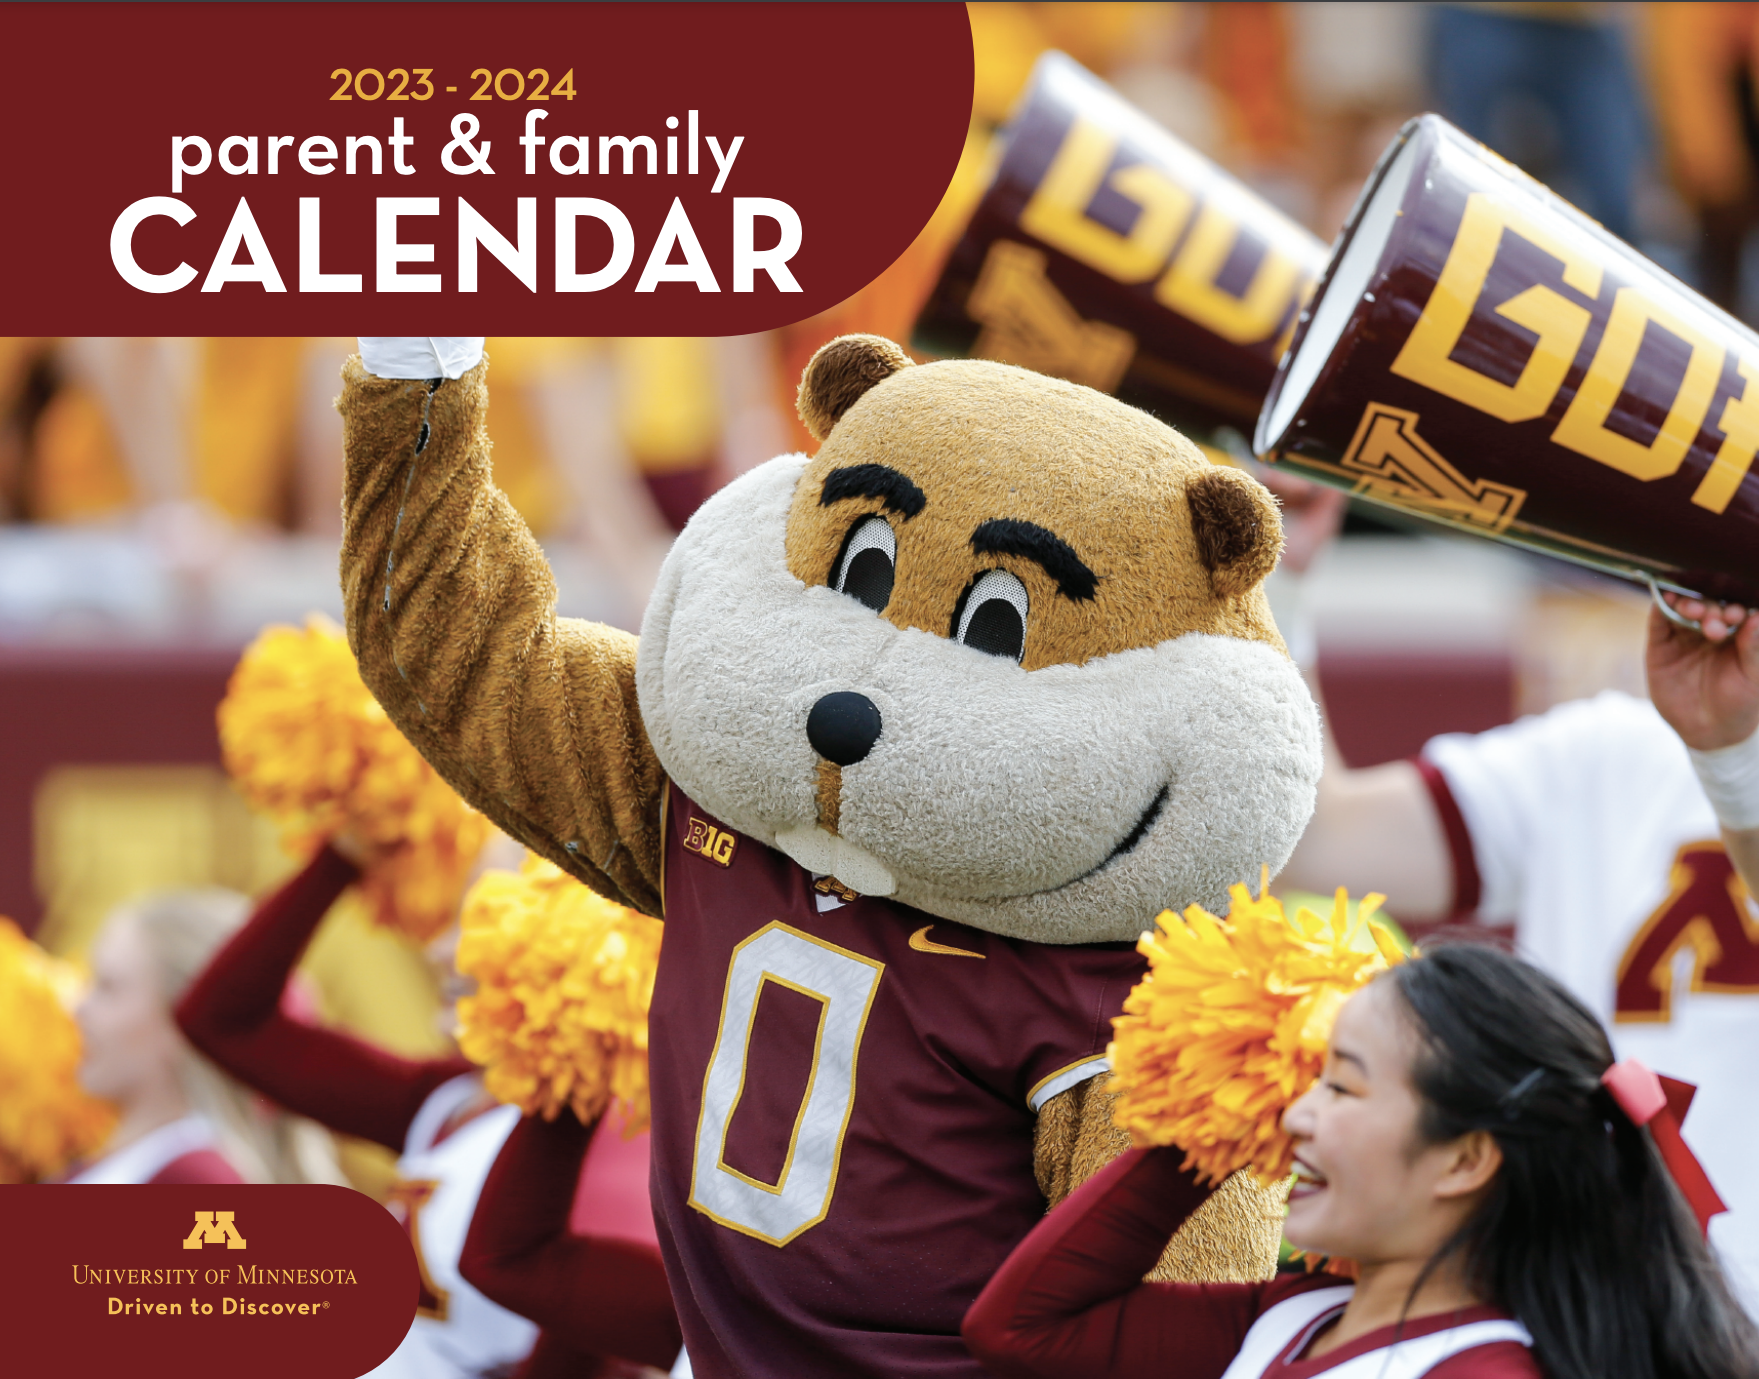 Cover of Parent & Family Calendar with Goldie smiling